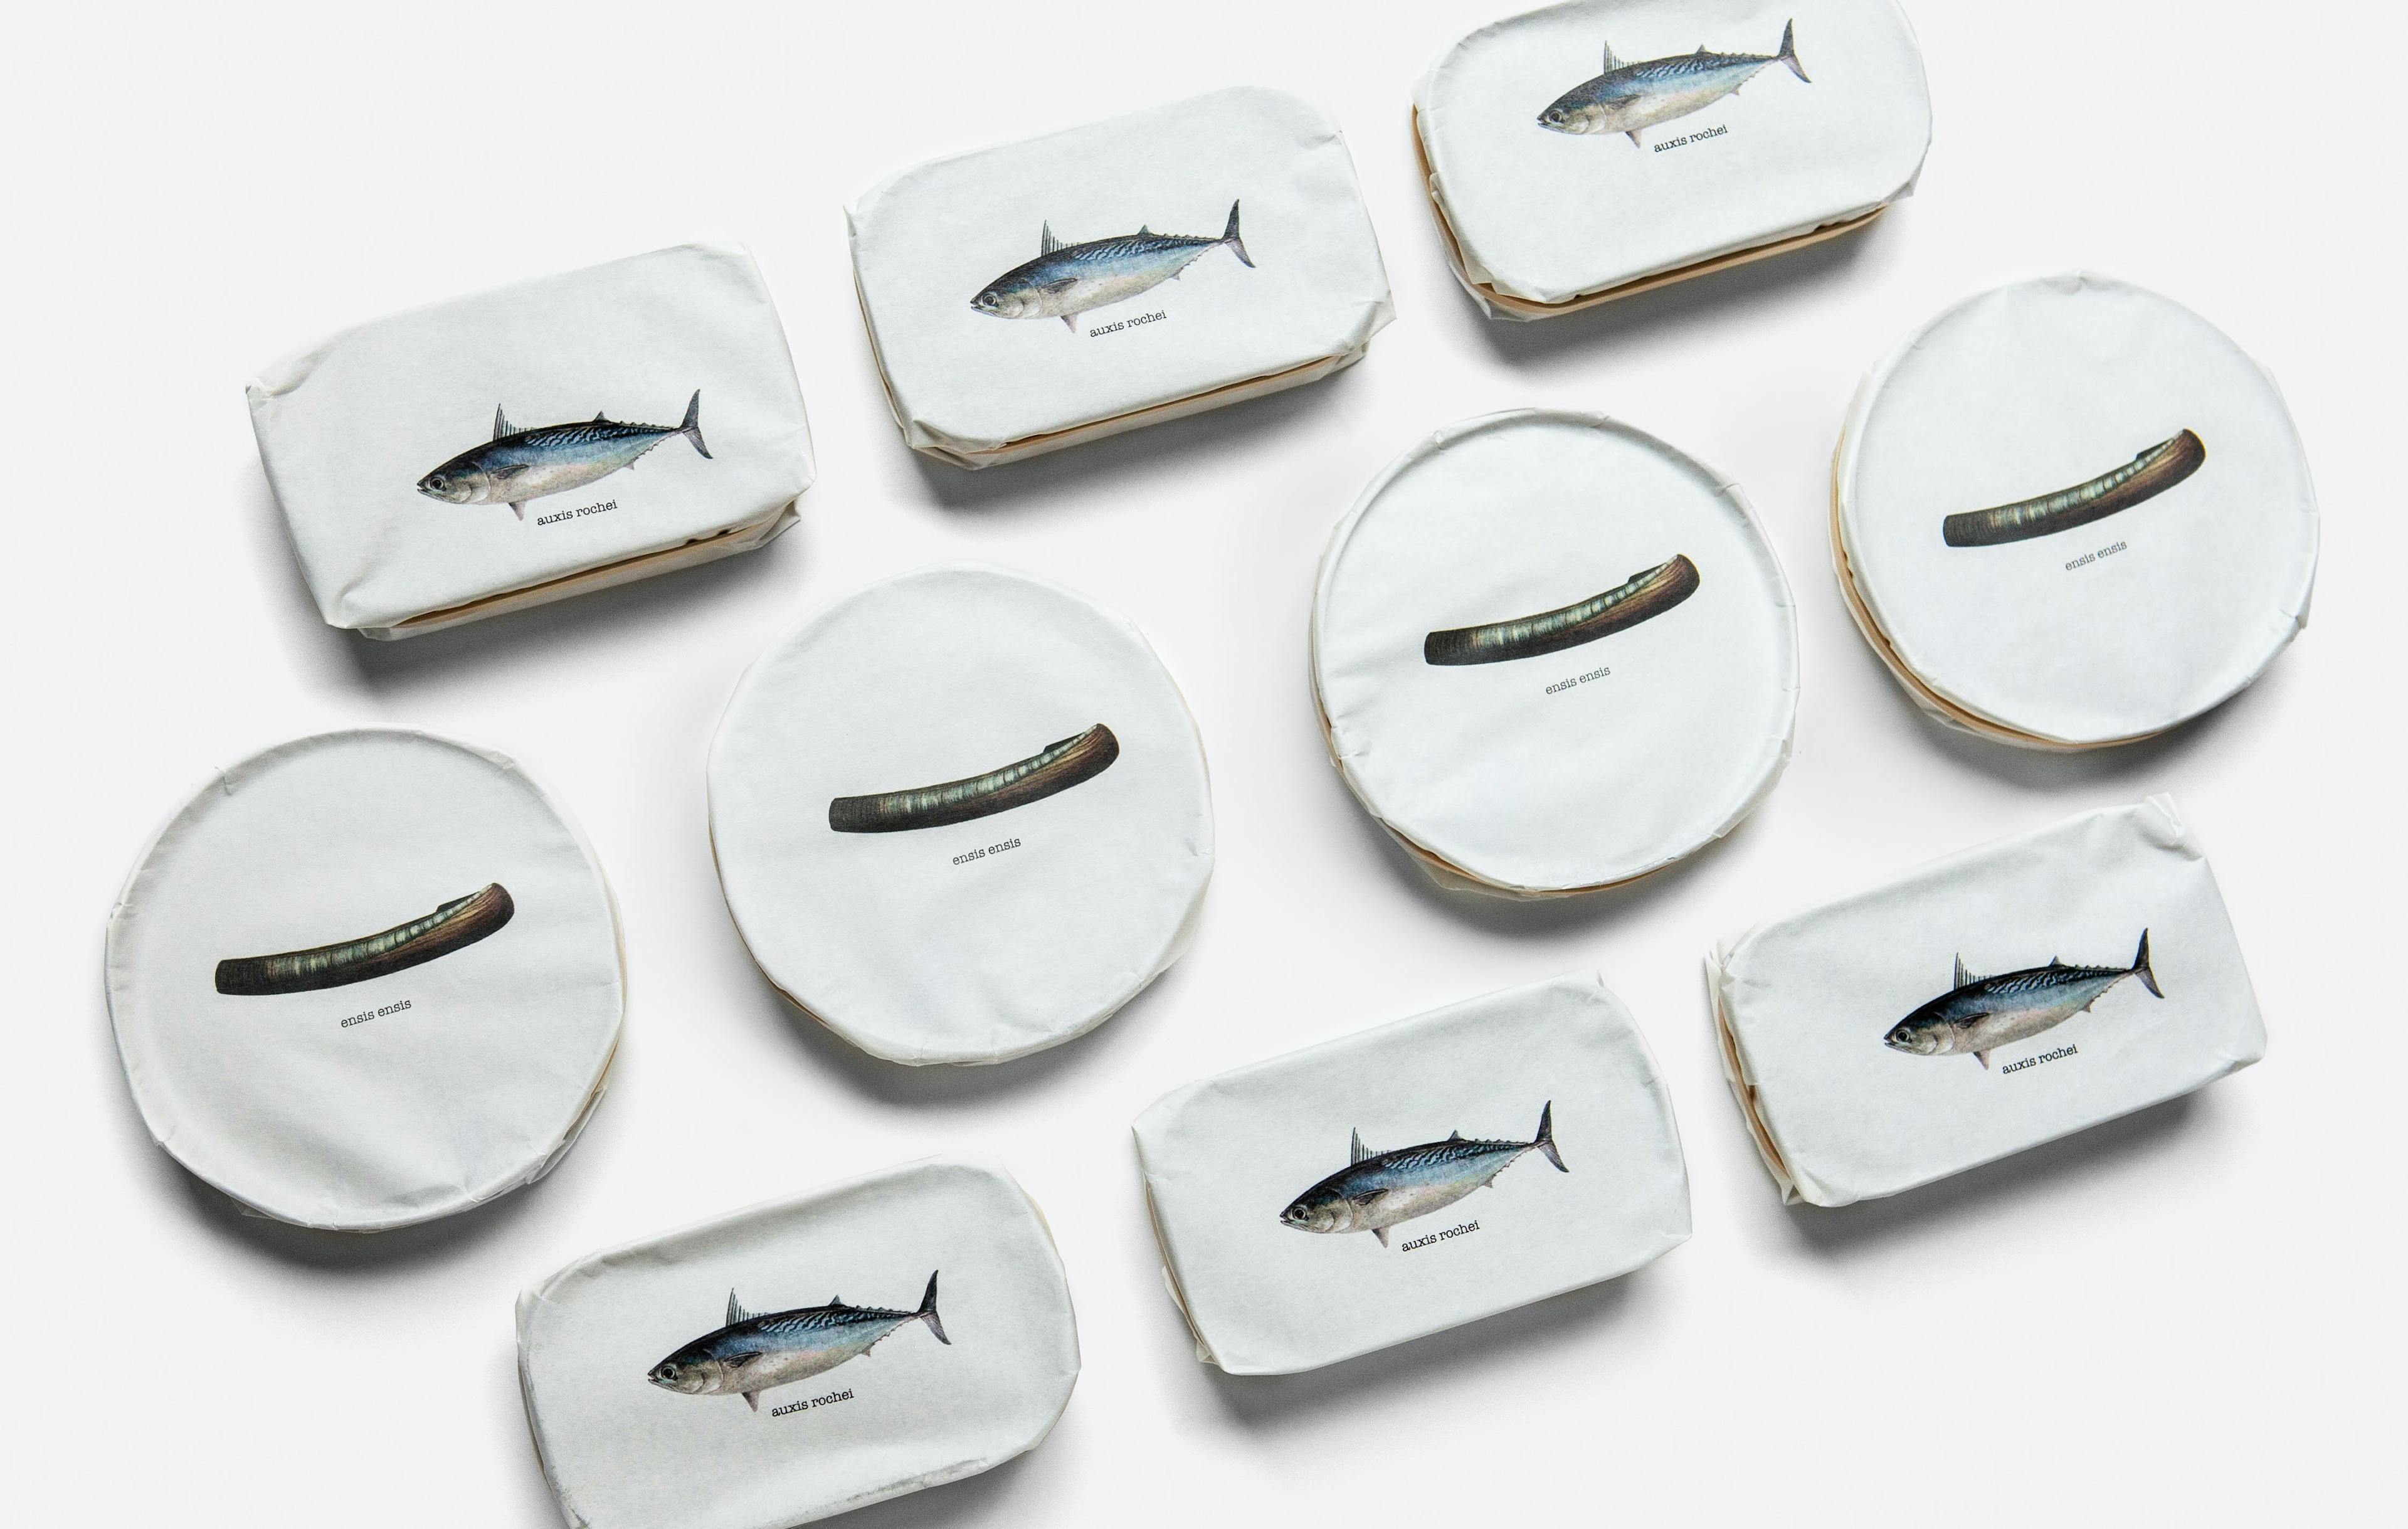 A geometric grouping of tinned fish from Pyscis.